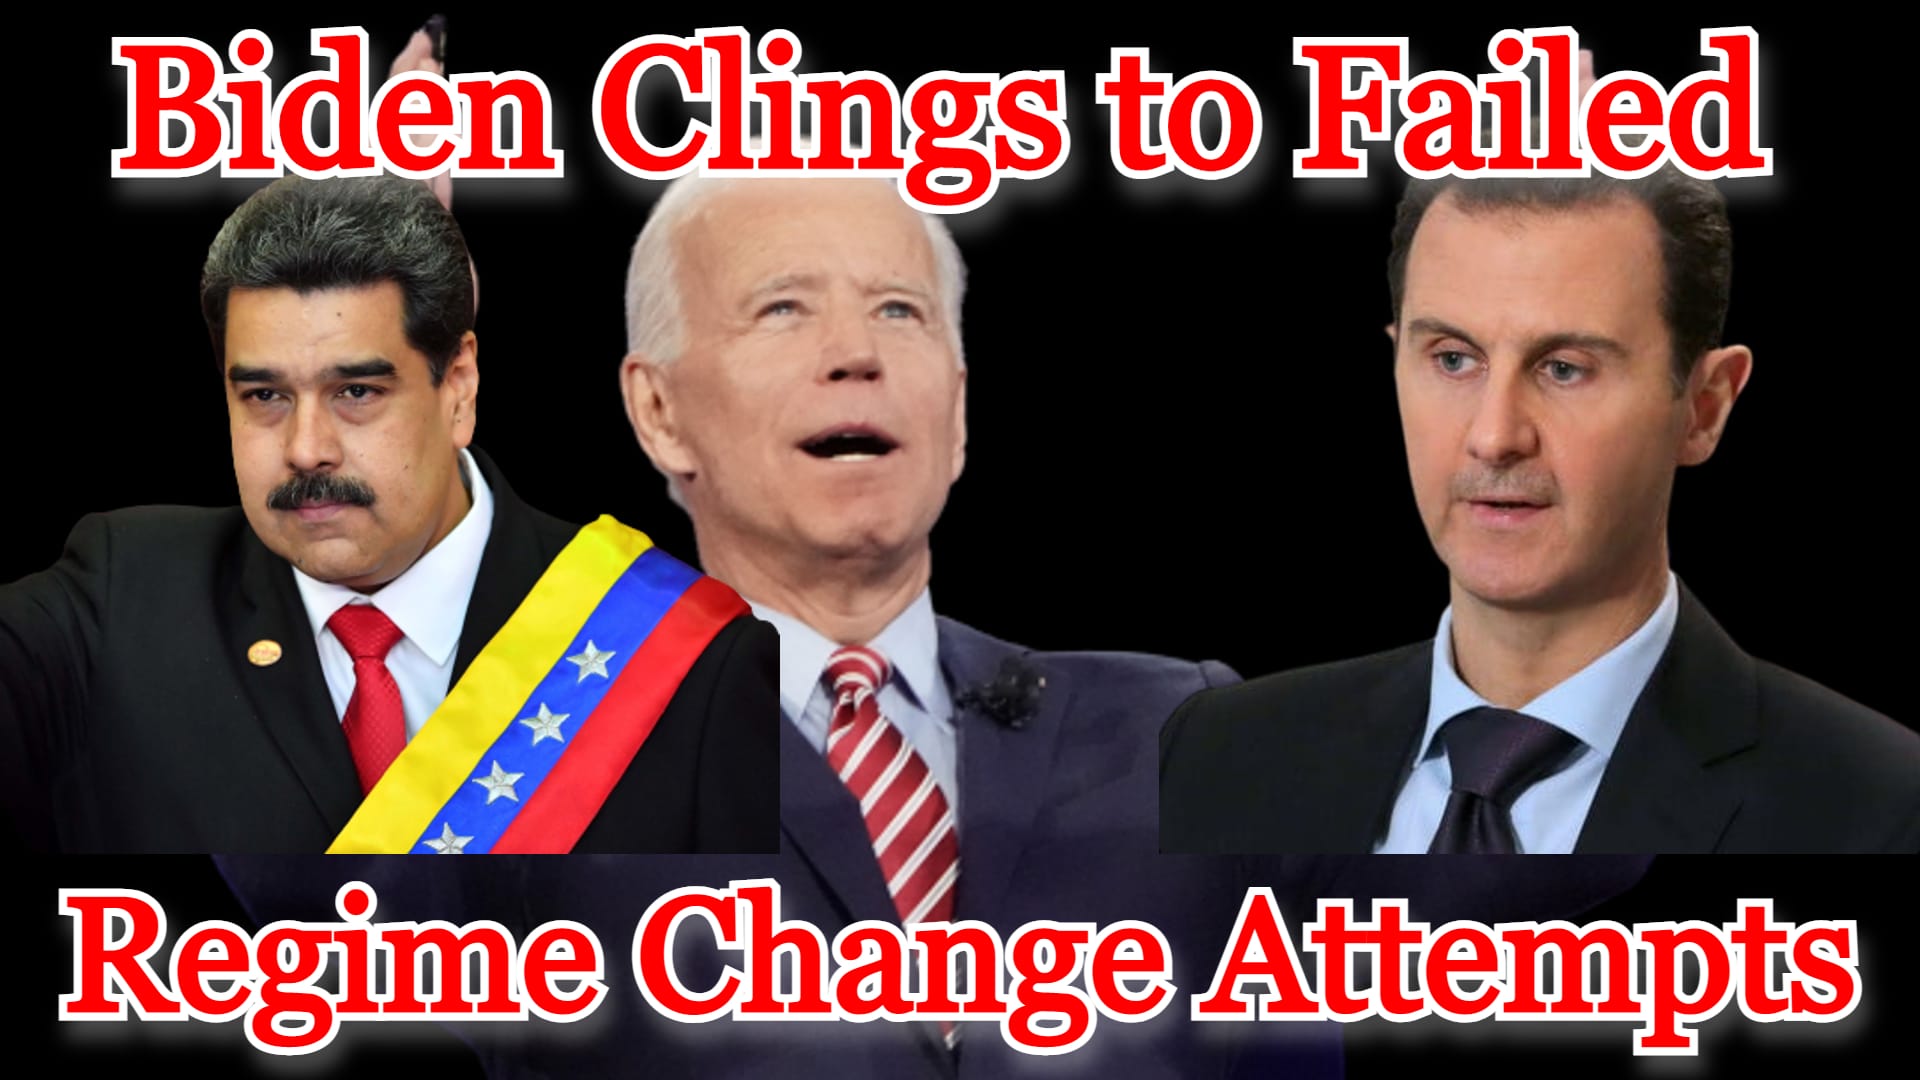 COI #370: Biden Clings to Failed Regime Change Attempts